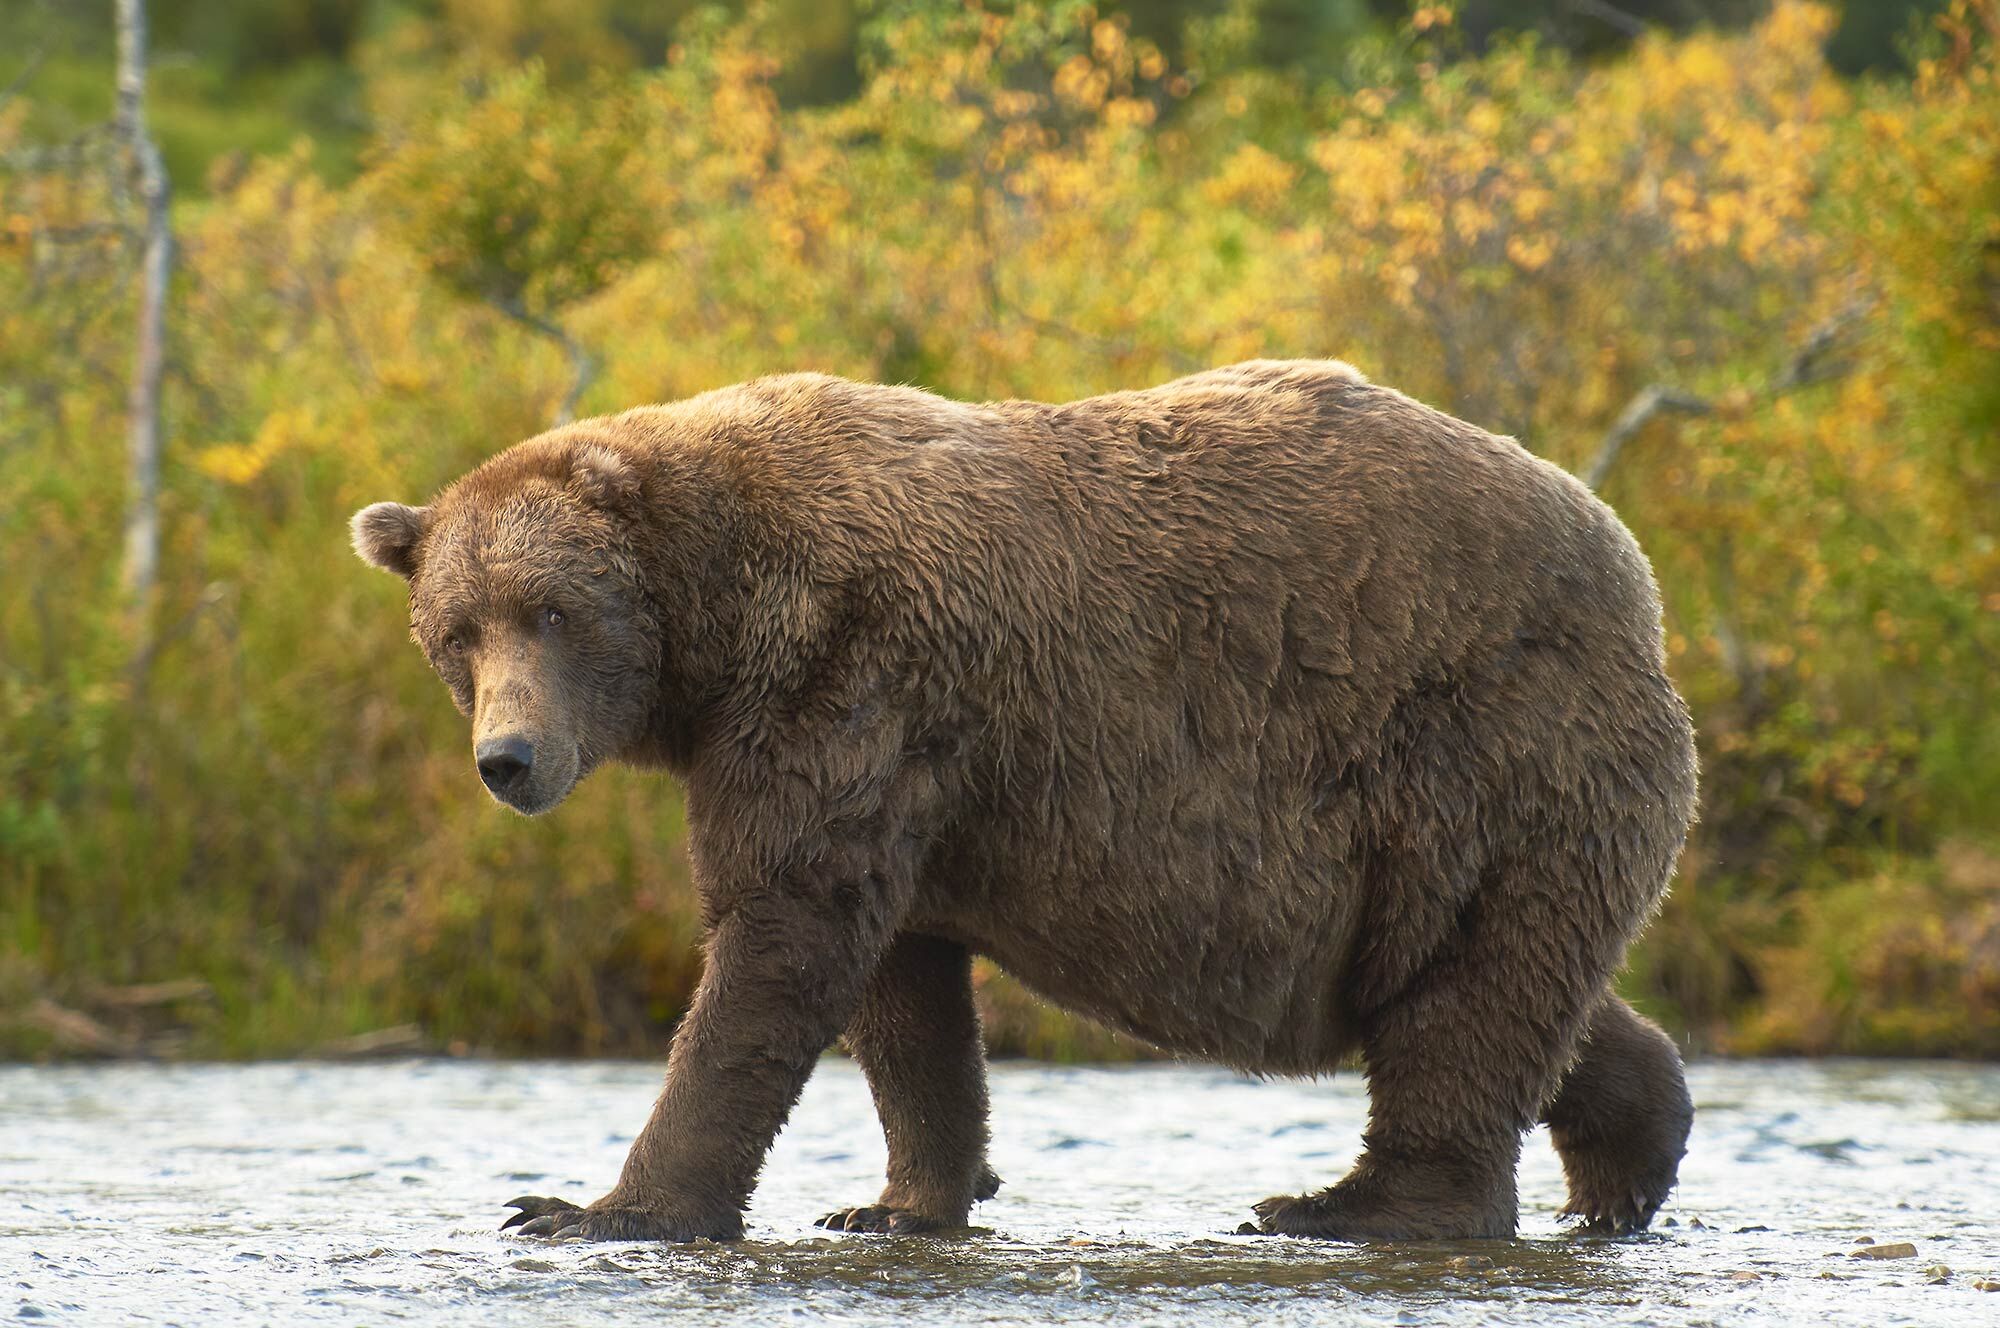 One big fat brown bear walking up Brooks River. A well-fed male brown bear saunters past on his way upriver. Brown bear, Katmai...